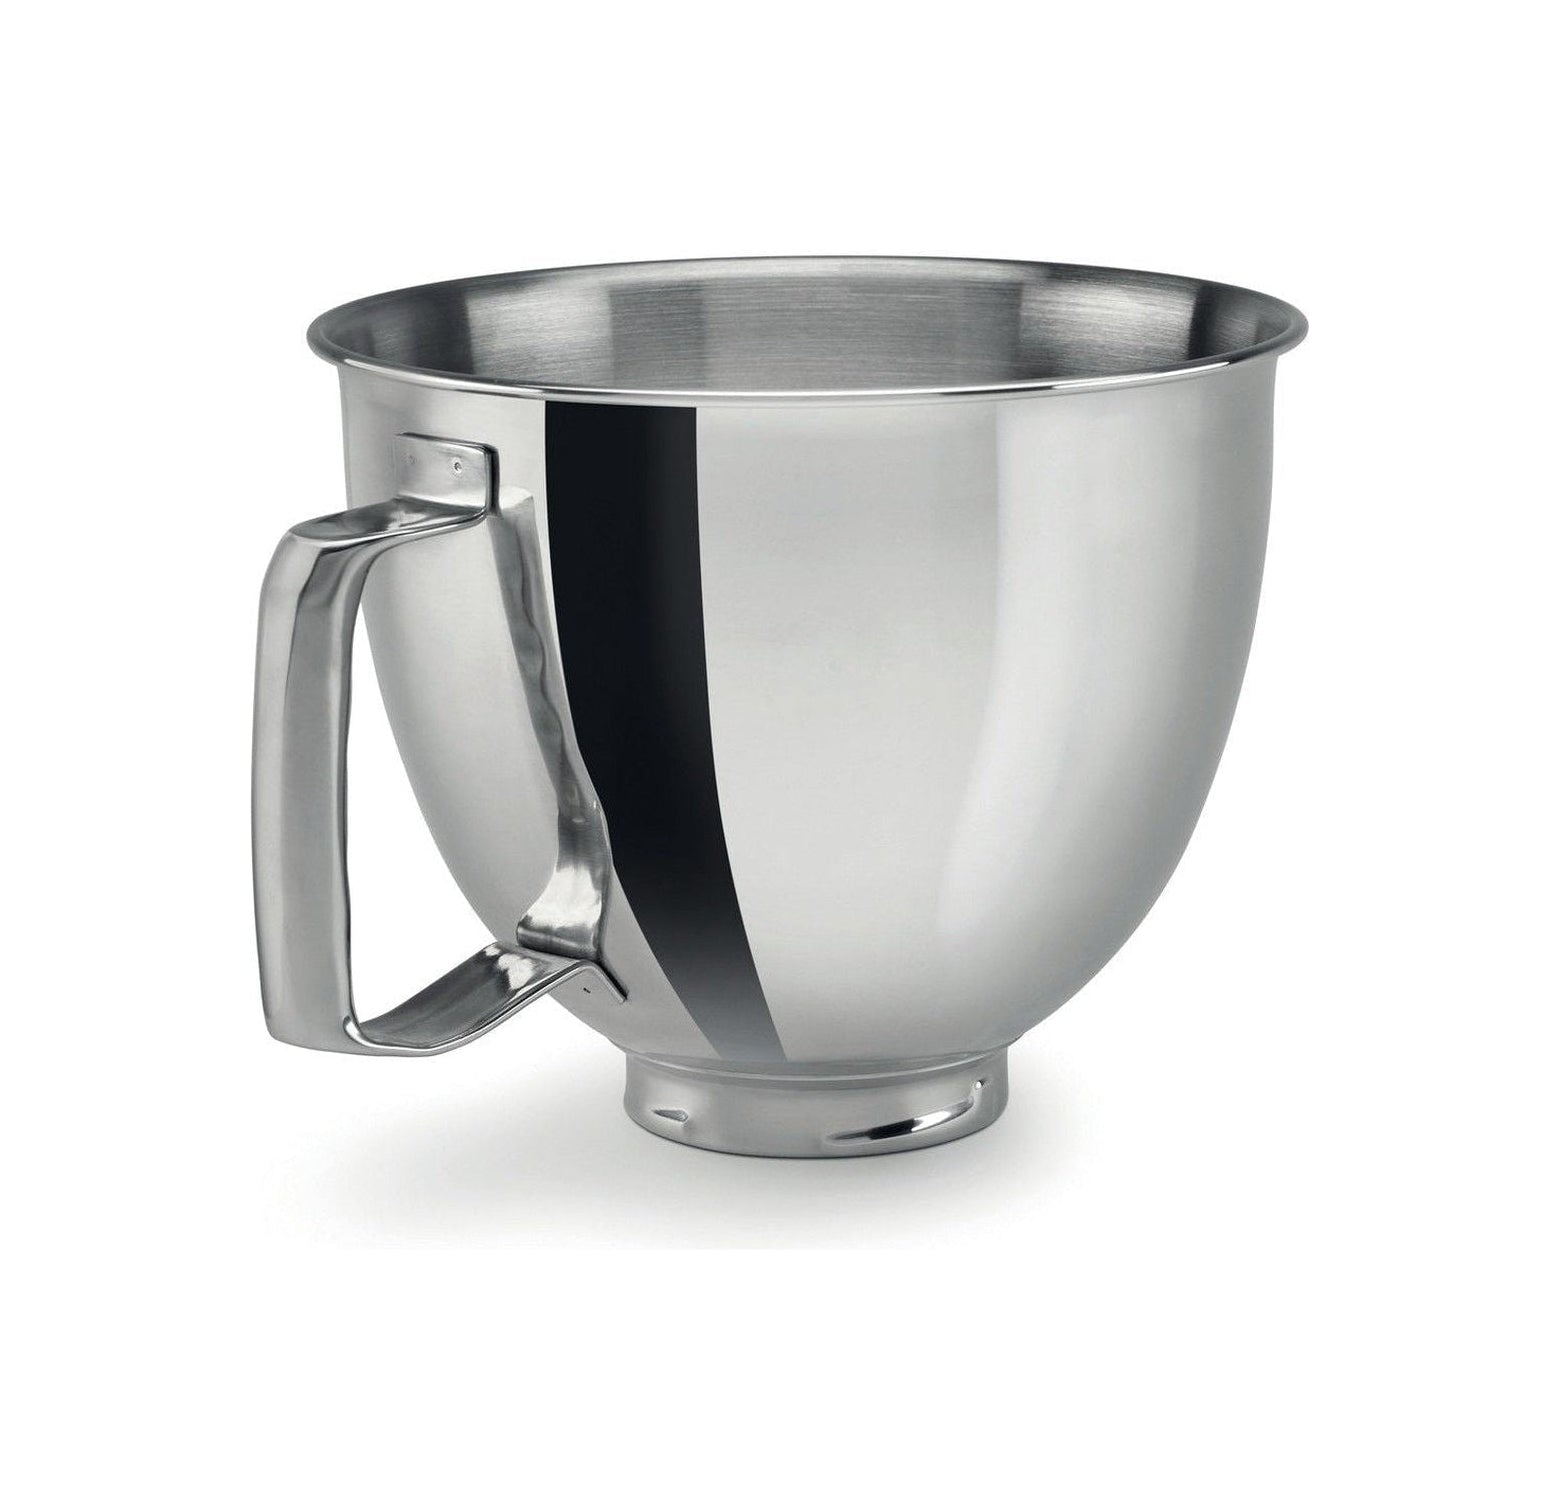 Kitchen Aid 5 Ksm35 Ssfp Mixing Bowl For 3.3 L Stainless Steel, 3.3 L